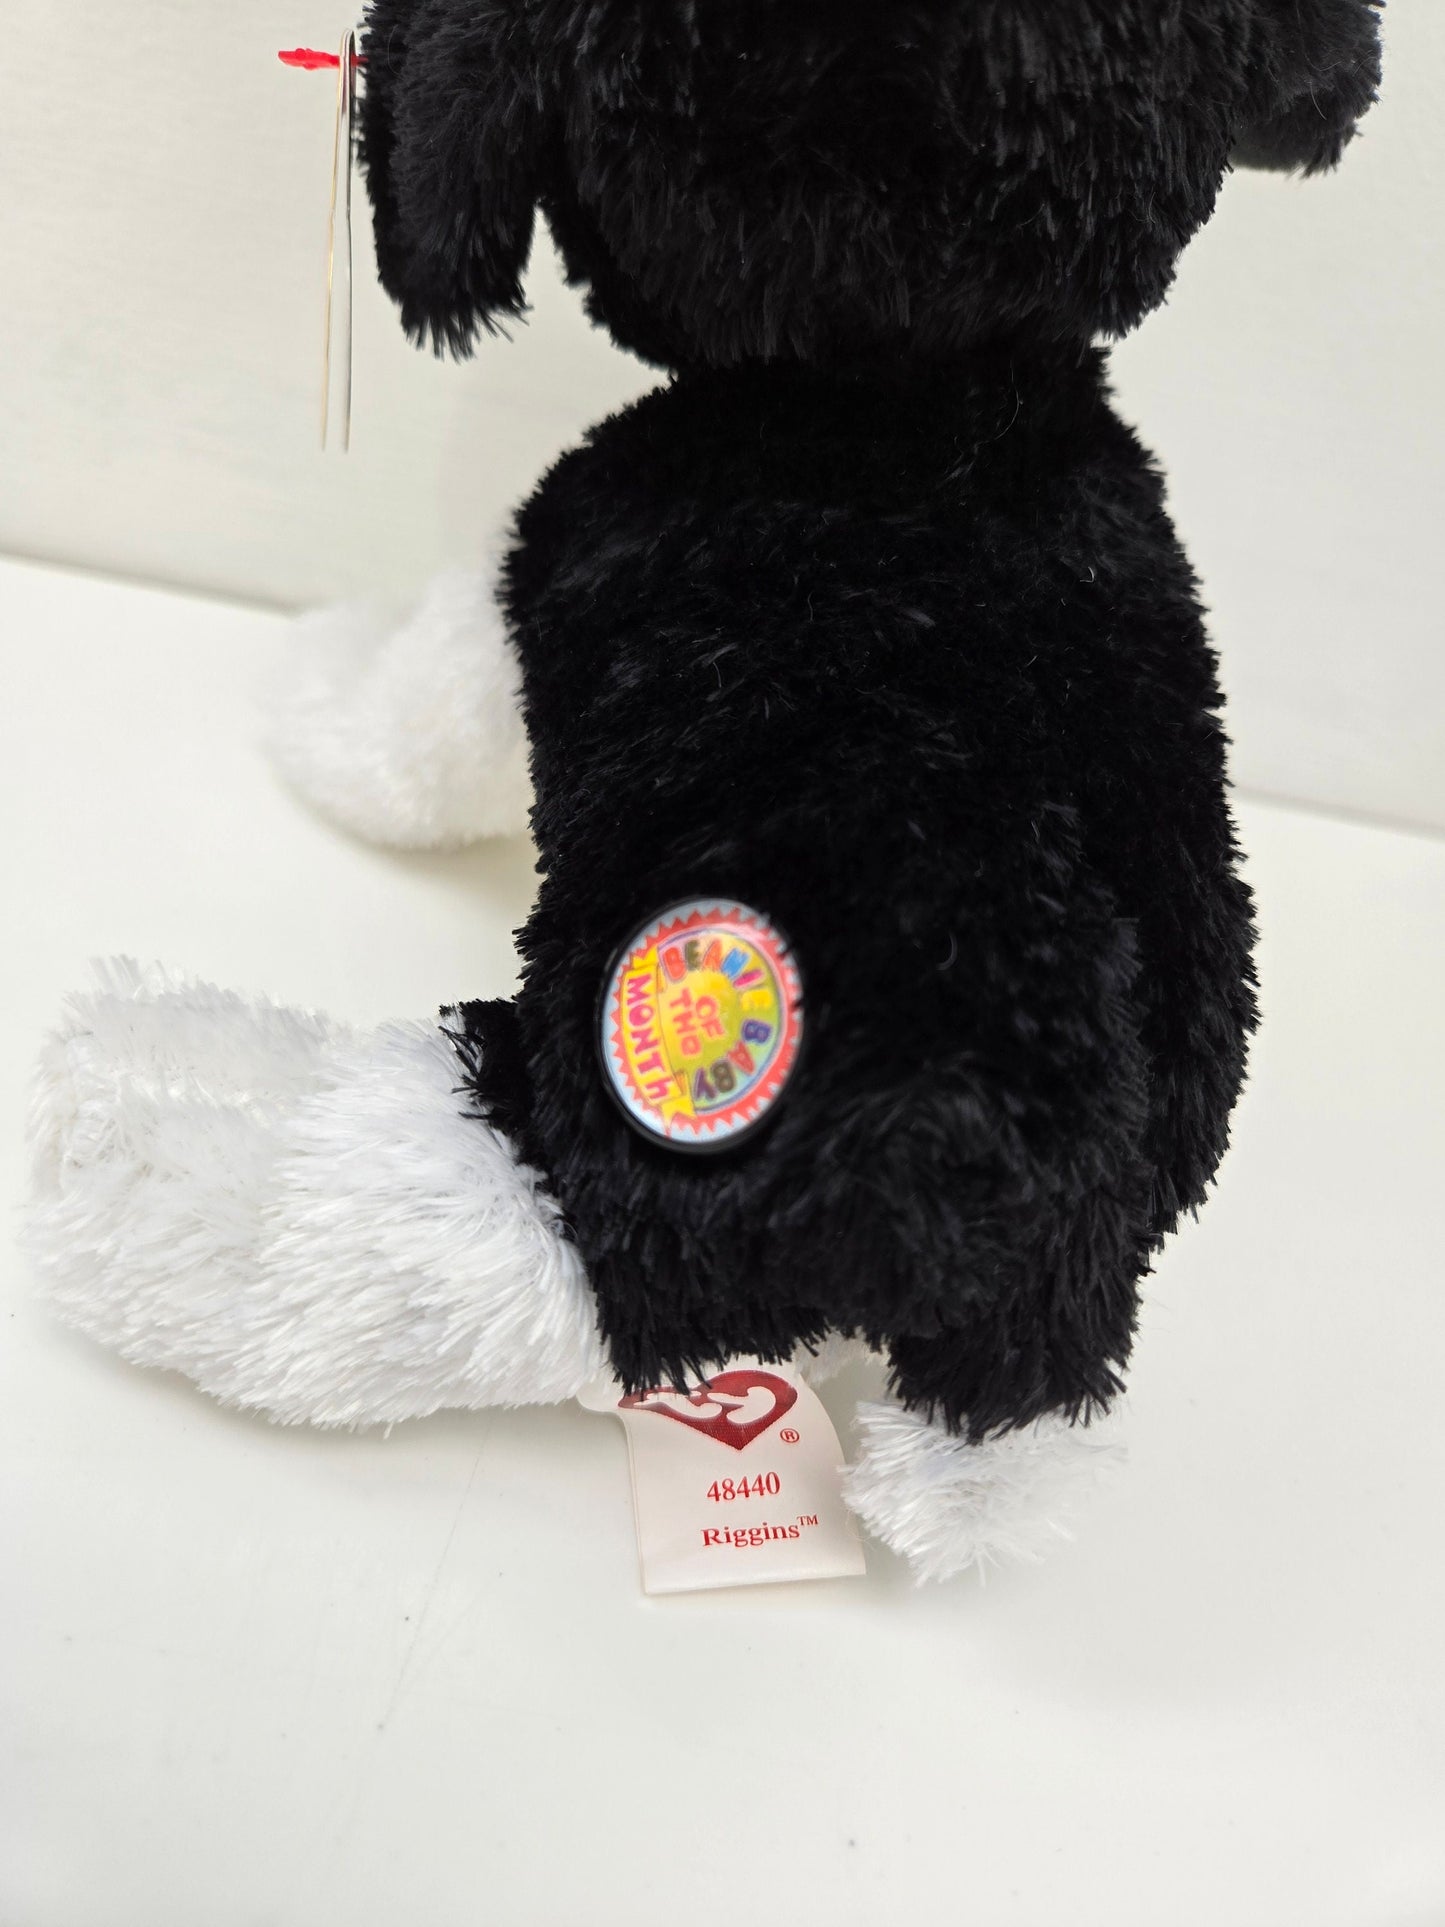 Ty Beanie Baby “Riggins” the Dog - Beanie Baby of the Month *Rare* (6 inch)